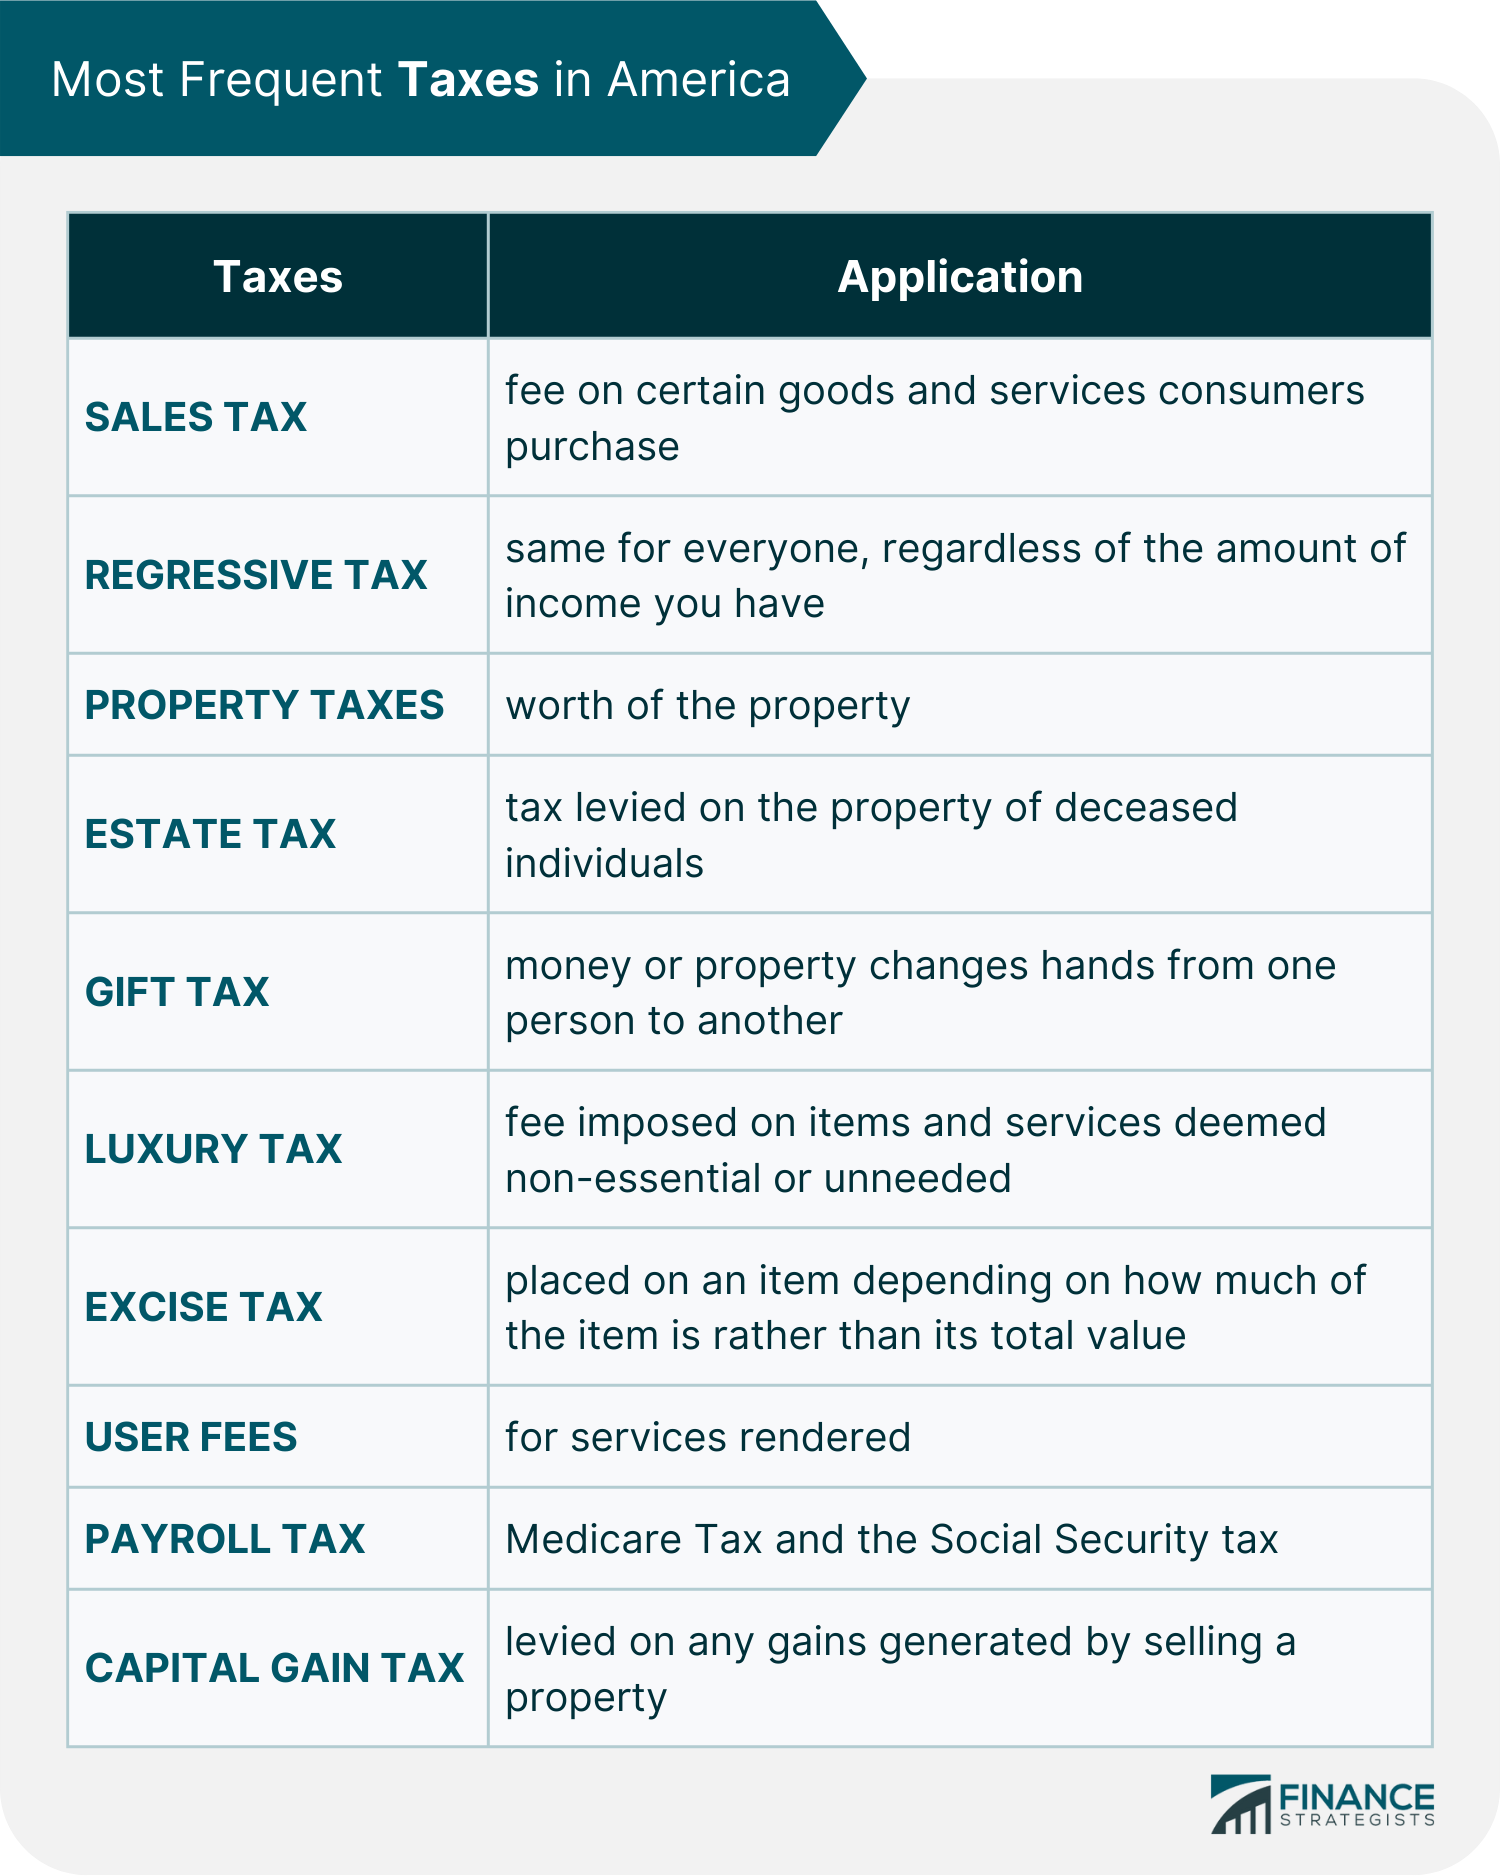 Most Frequent Taxes in America